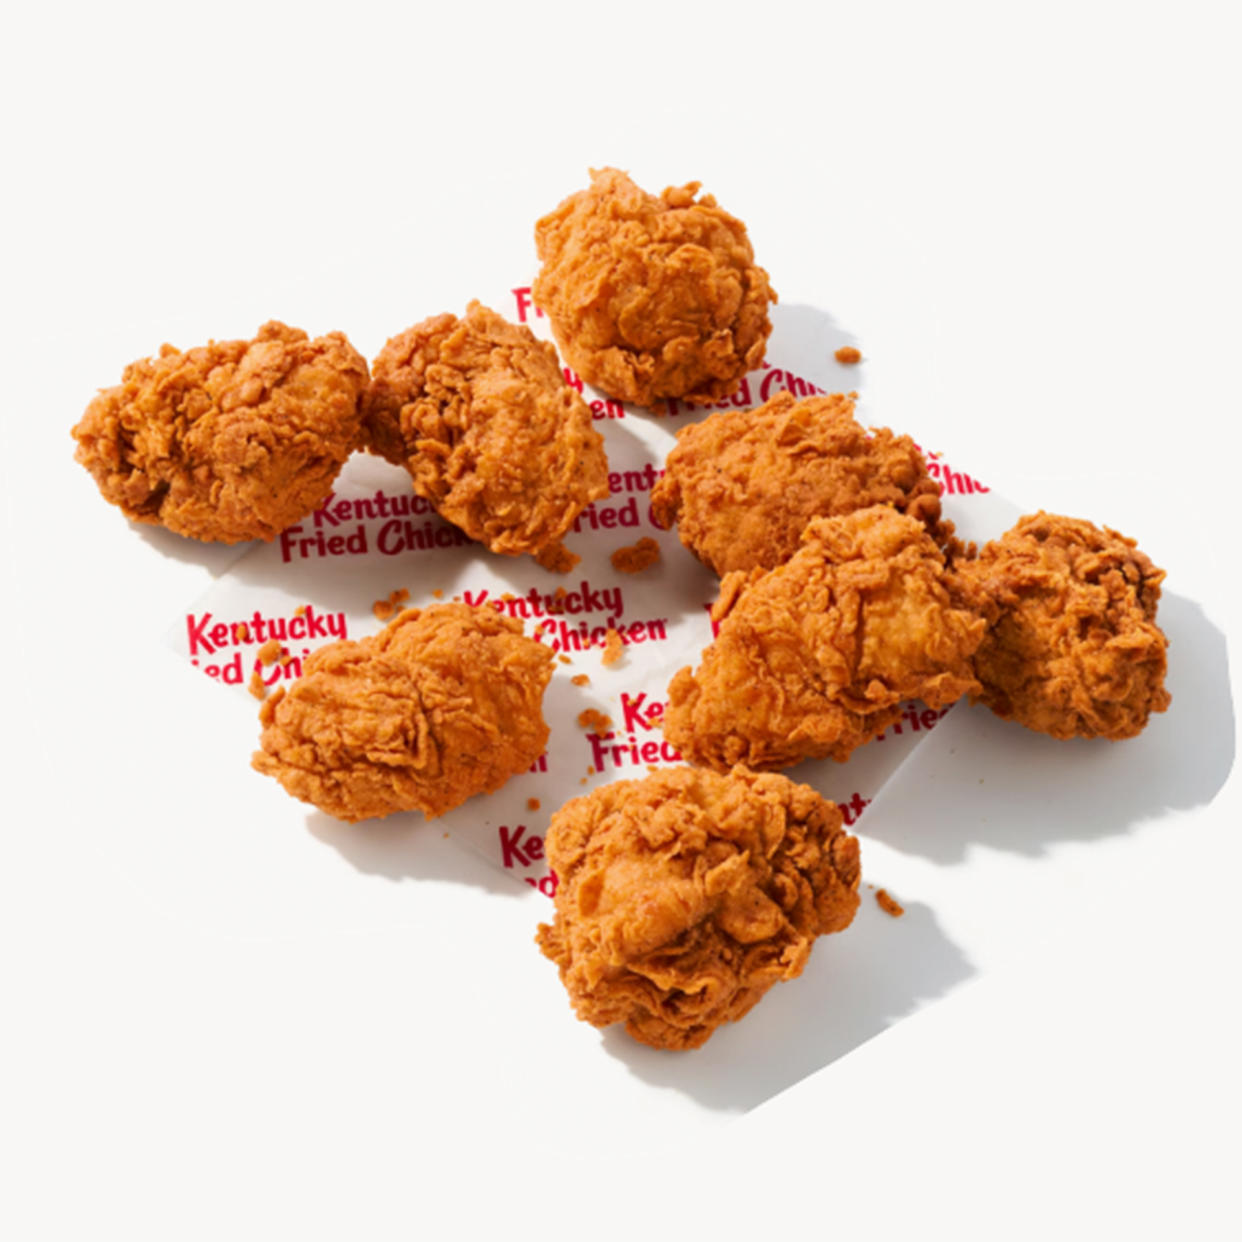 Kentucky Fried Chicken Nuggets in an 8-piece, on menus at participating restaurants nationwide starting March 27. (KFC)